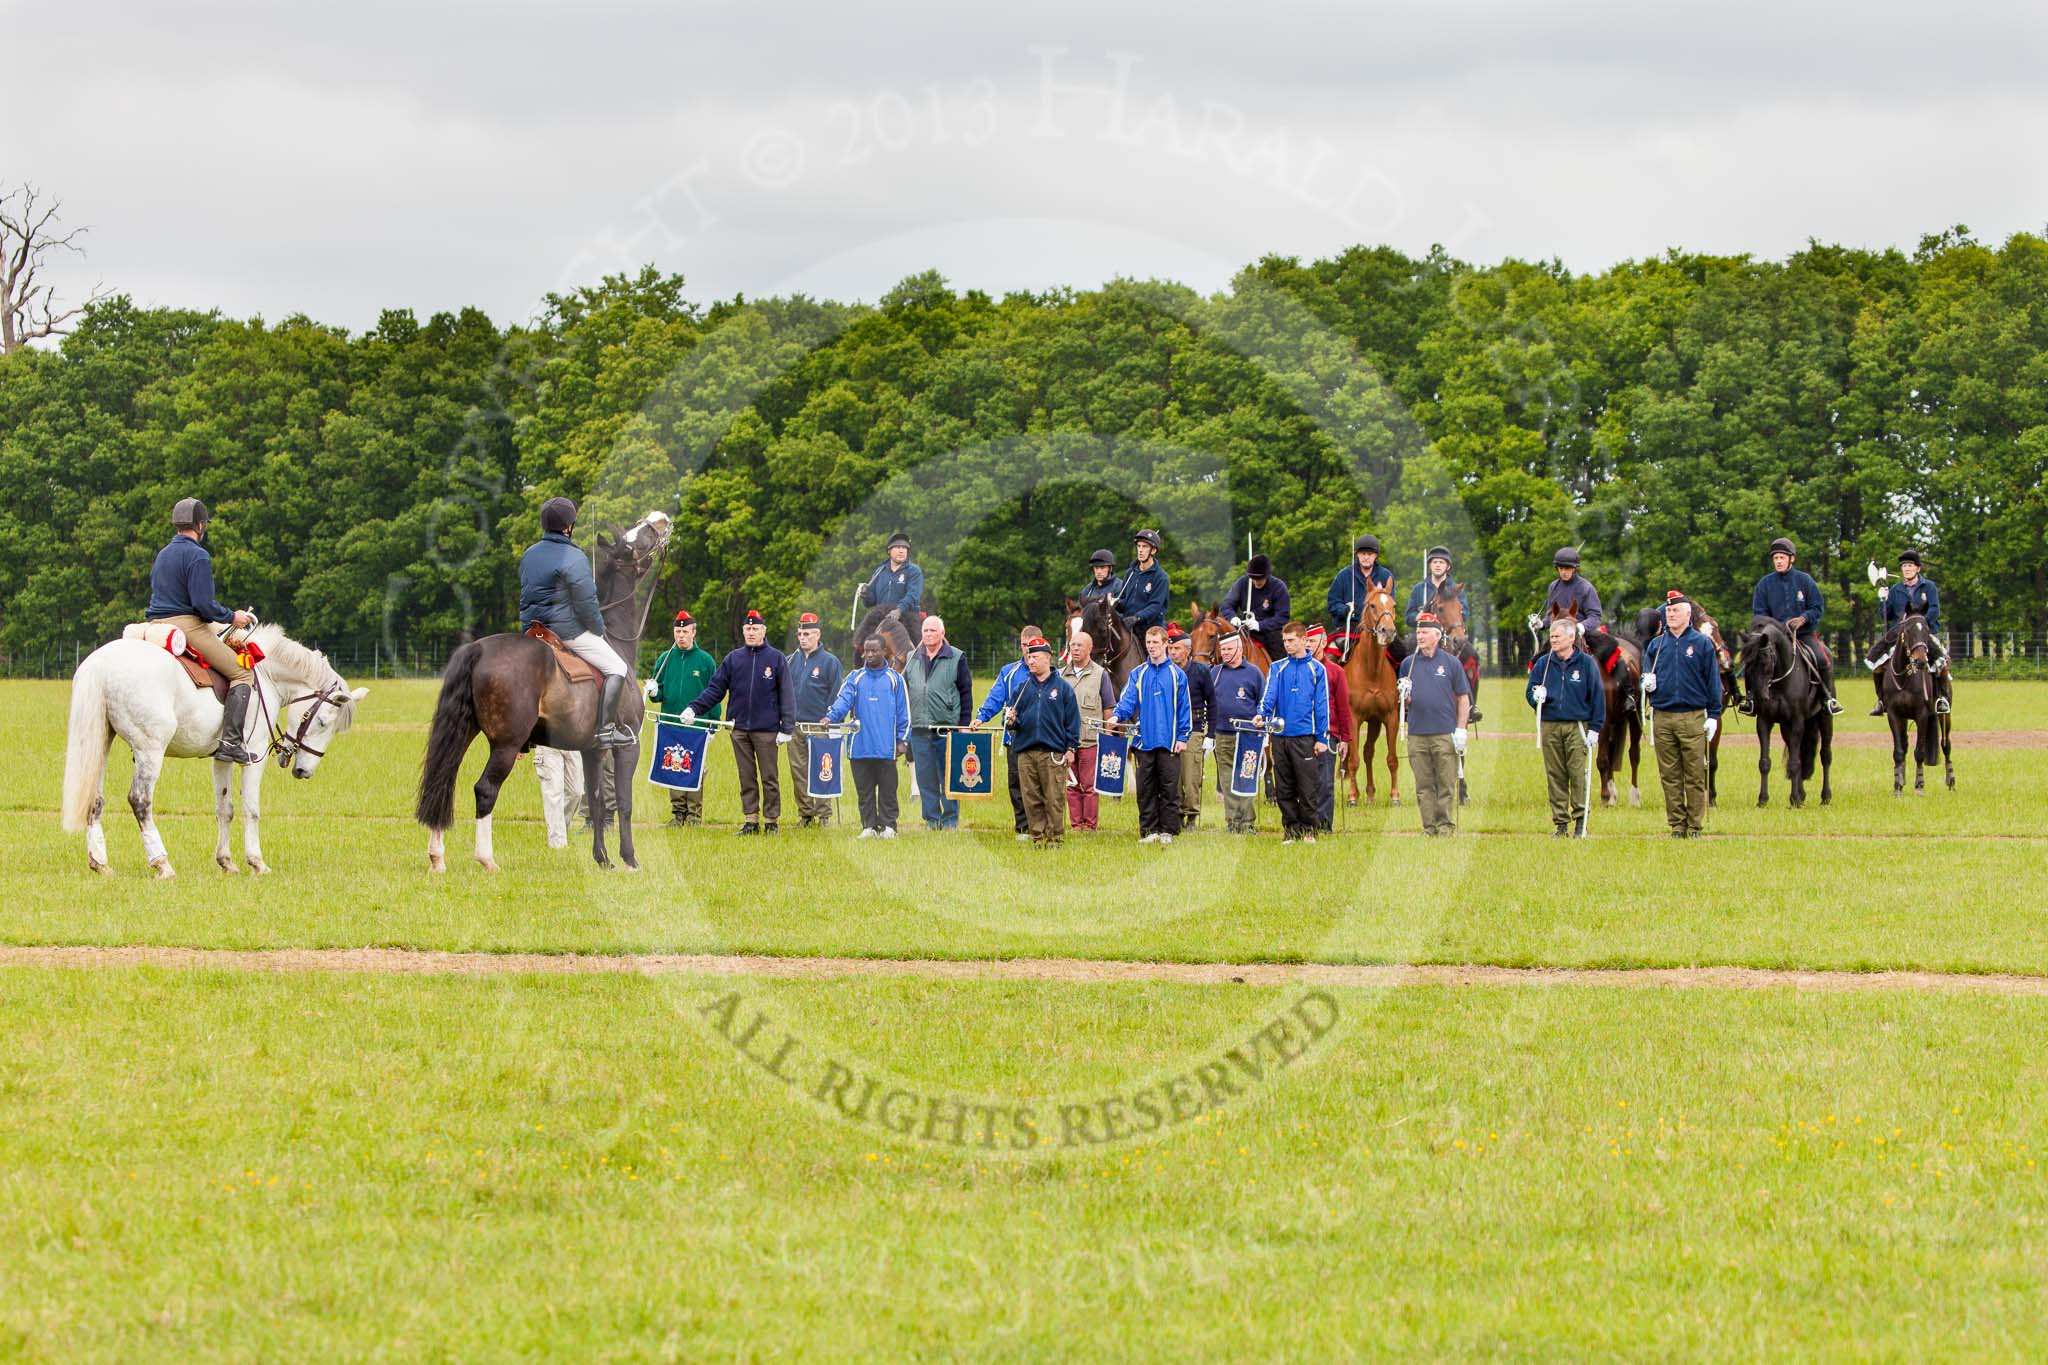 The Light Cavalry HAC Annual Review and Inspection 2013.
Windsor Great Park Review Ground,
Windsor,
Berkshire,
United Kingdom,
on 09 June 2013 at 10:53, image #100